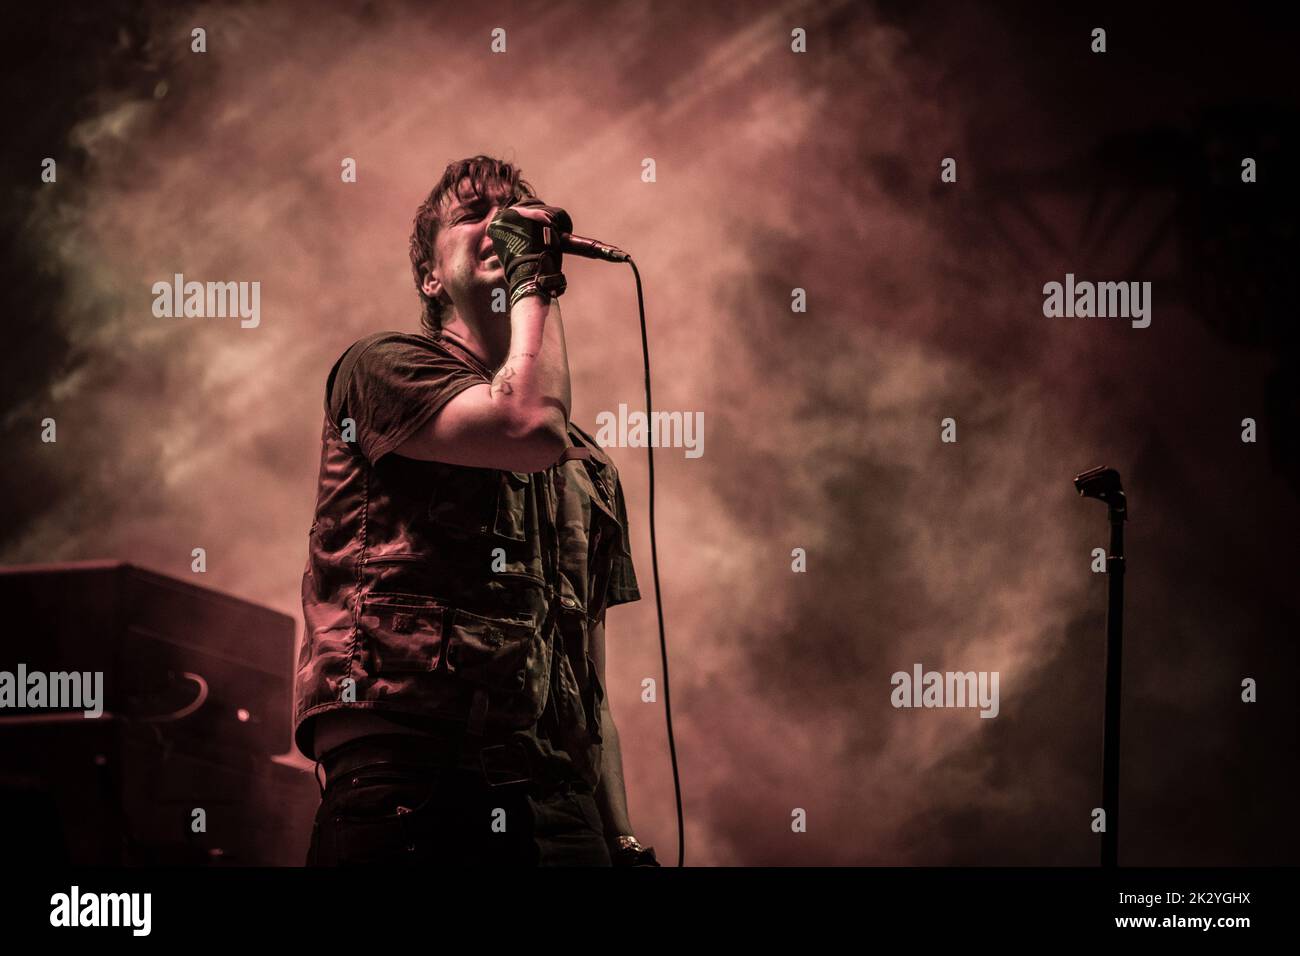 Roskilde, Denmark. 02nd, July 2022.The American rock band The Strokes performs a live concert at the Danish music festival Roskilde Festival 2022 in Roskilde. Here singer Julian Casablancas is seen live on stage. (Photo credit: Gonzales Photo - Thomas Rasmussen). Stock Photo